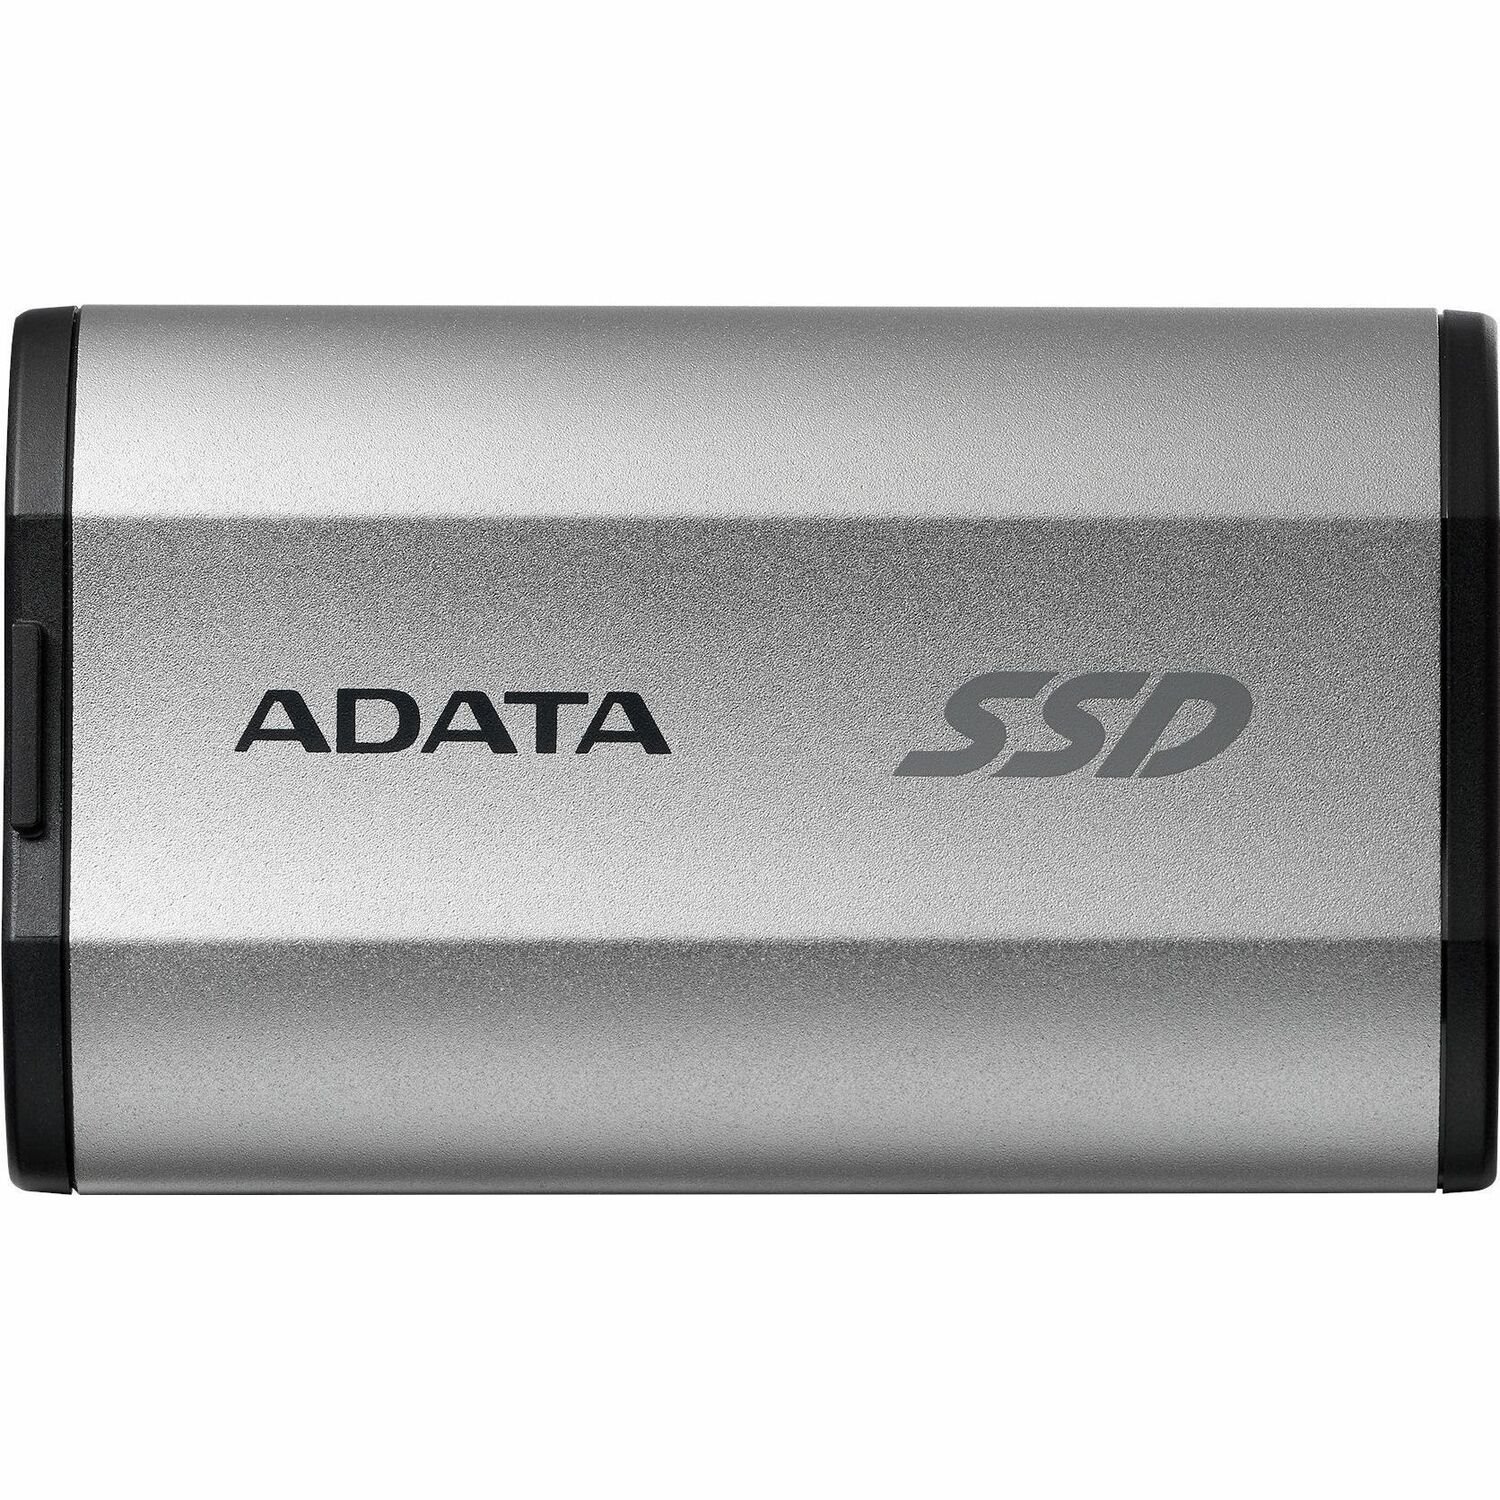 Adata SD810 500 GB Solid State Drive - External - Silver